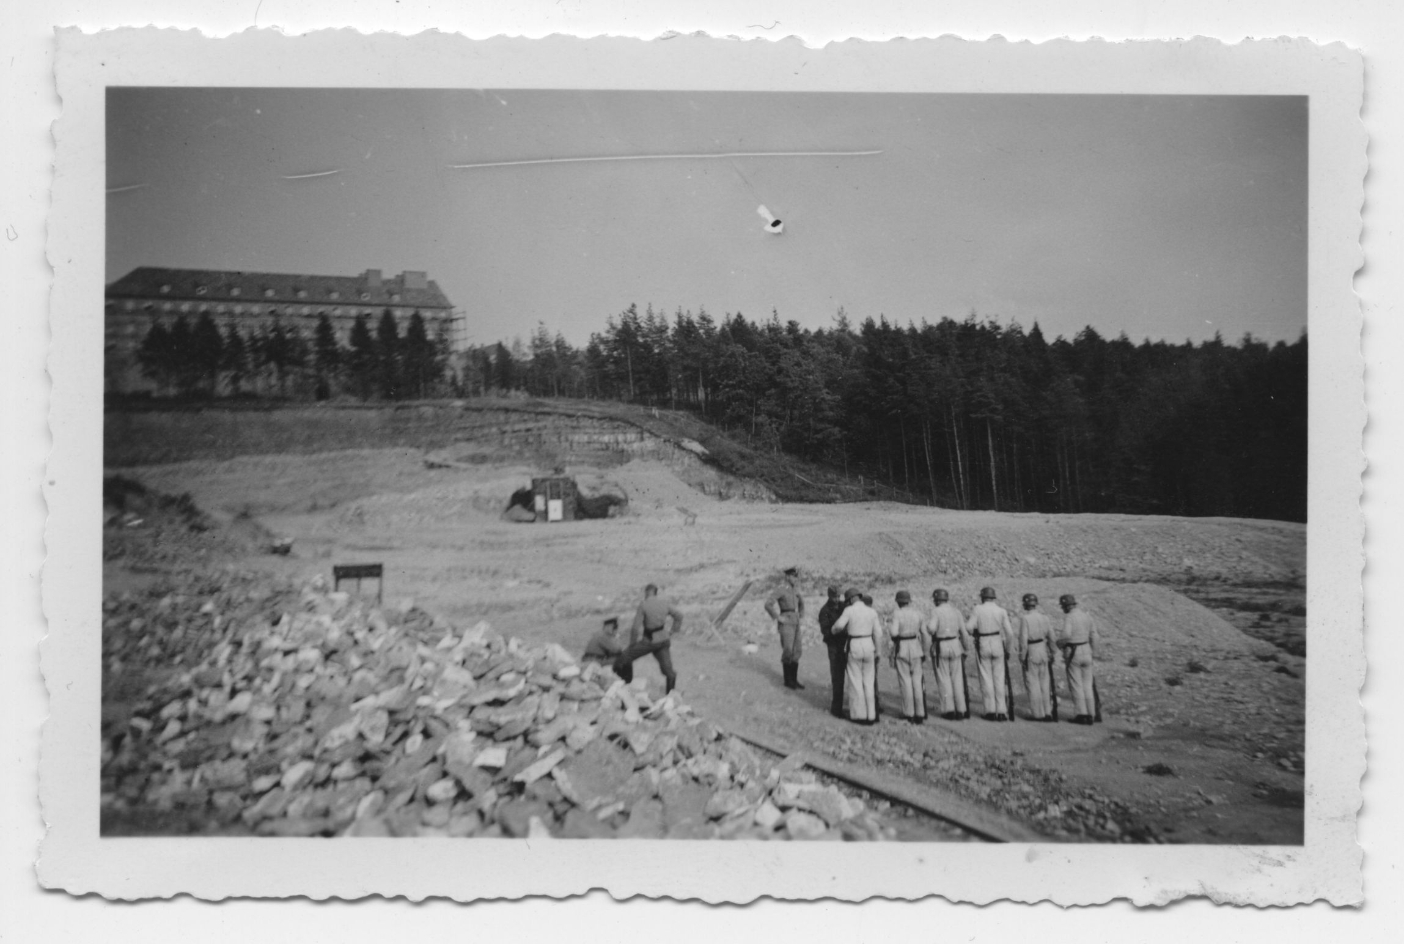 SS members of Totenkopf-Standarte 14. Some uniformed men are standing in the quarry of Buchenwald concentration camp. The Hundertschaftskaserne Nr. 1 of the Waffen-SS, which is under construction, can be seen in the background.